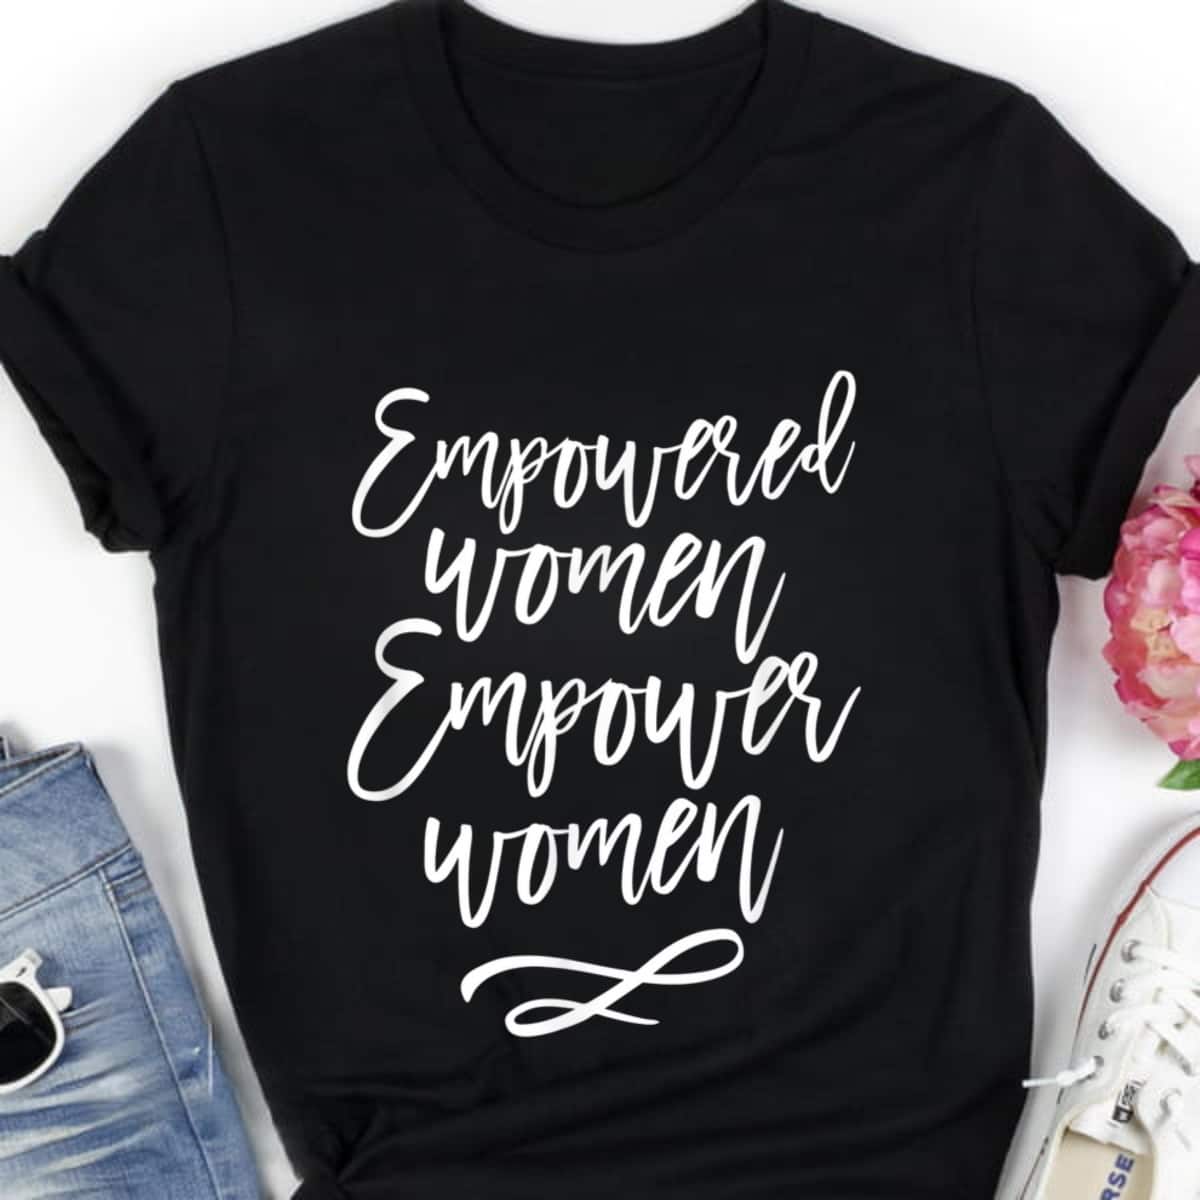 Empowered Empower Strong Women Feminist Equality T-Shirt